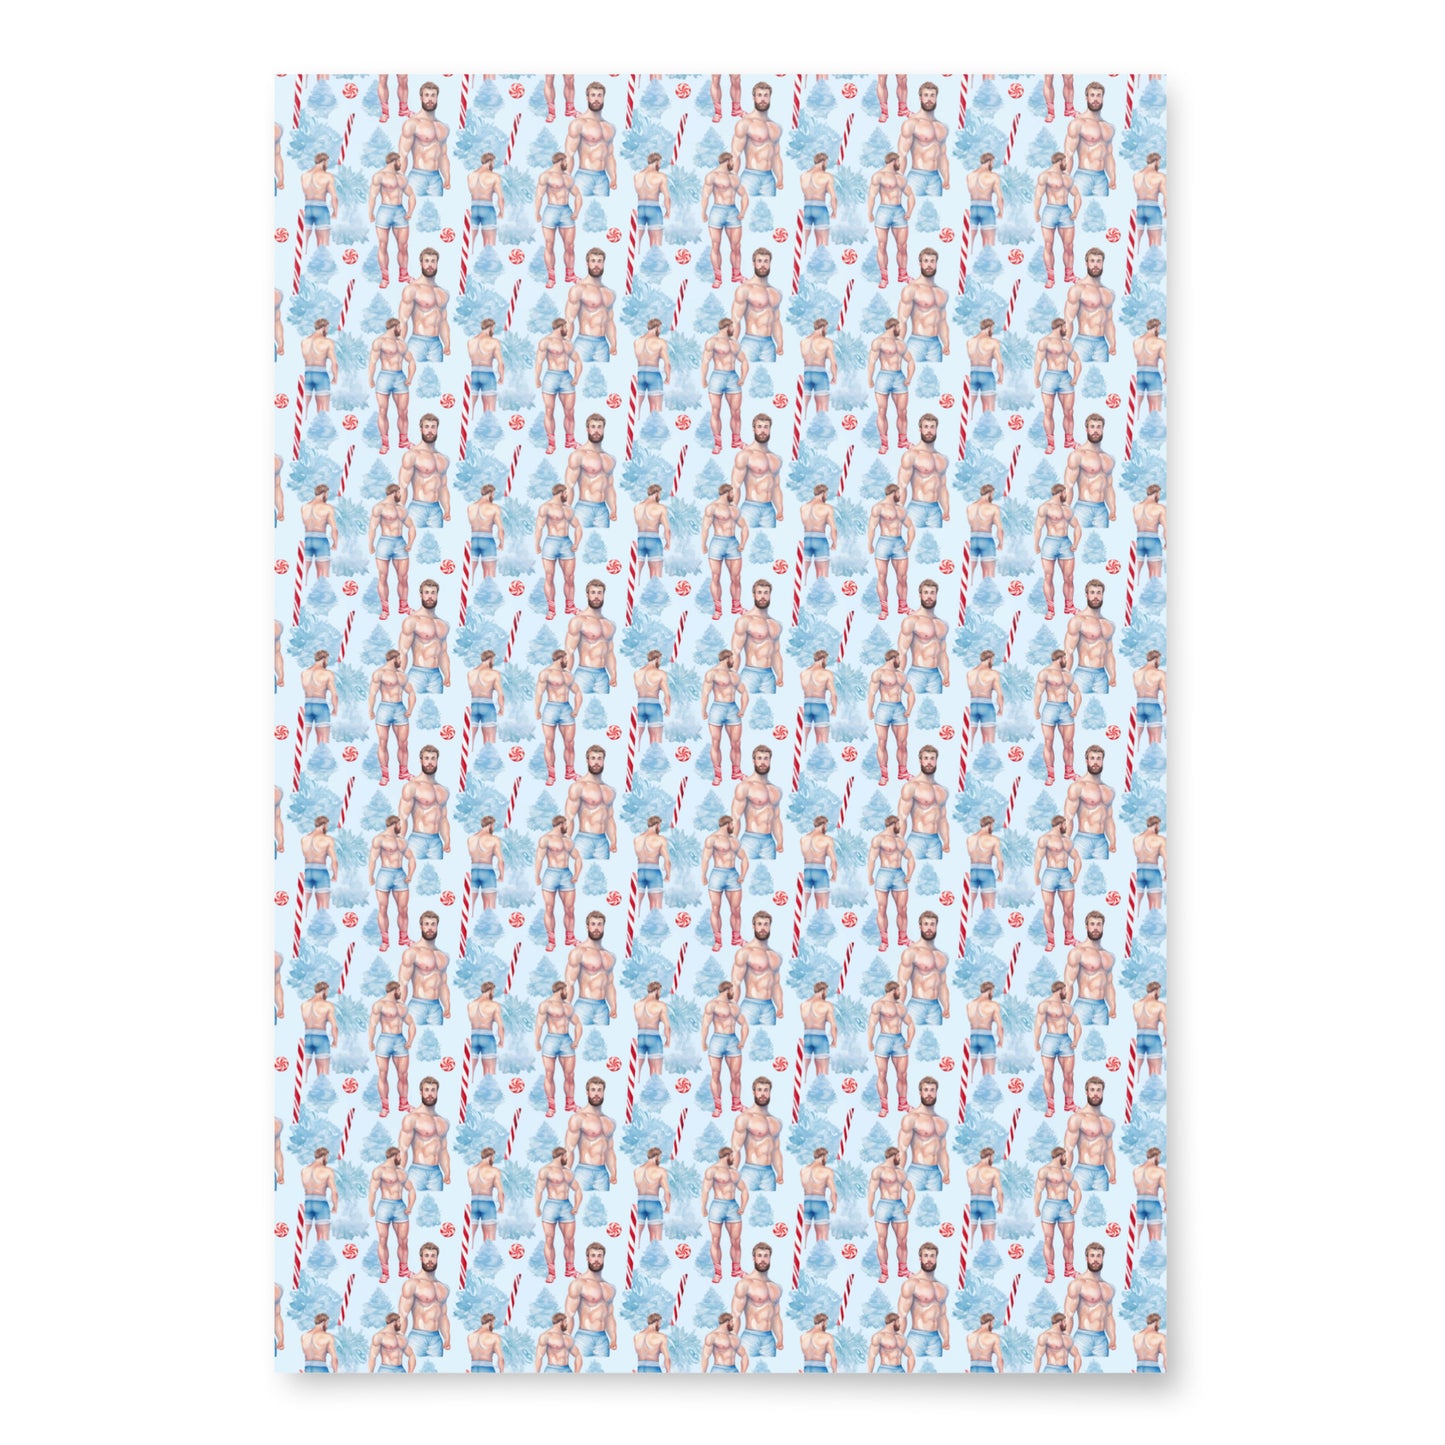 SnowMAN Gift Wrapping Paper